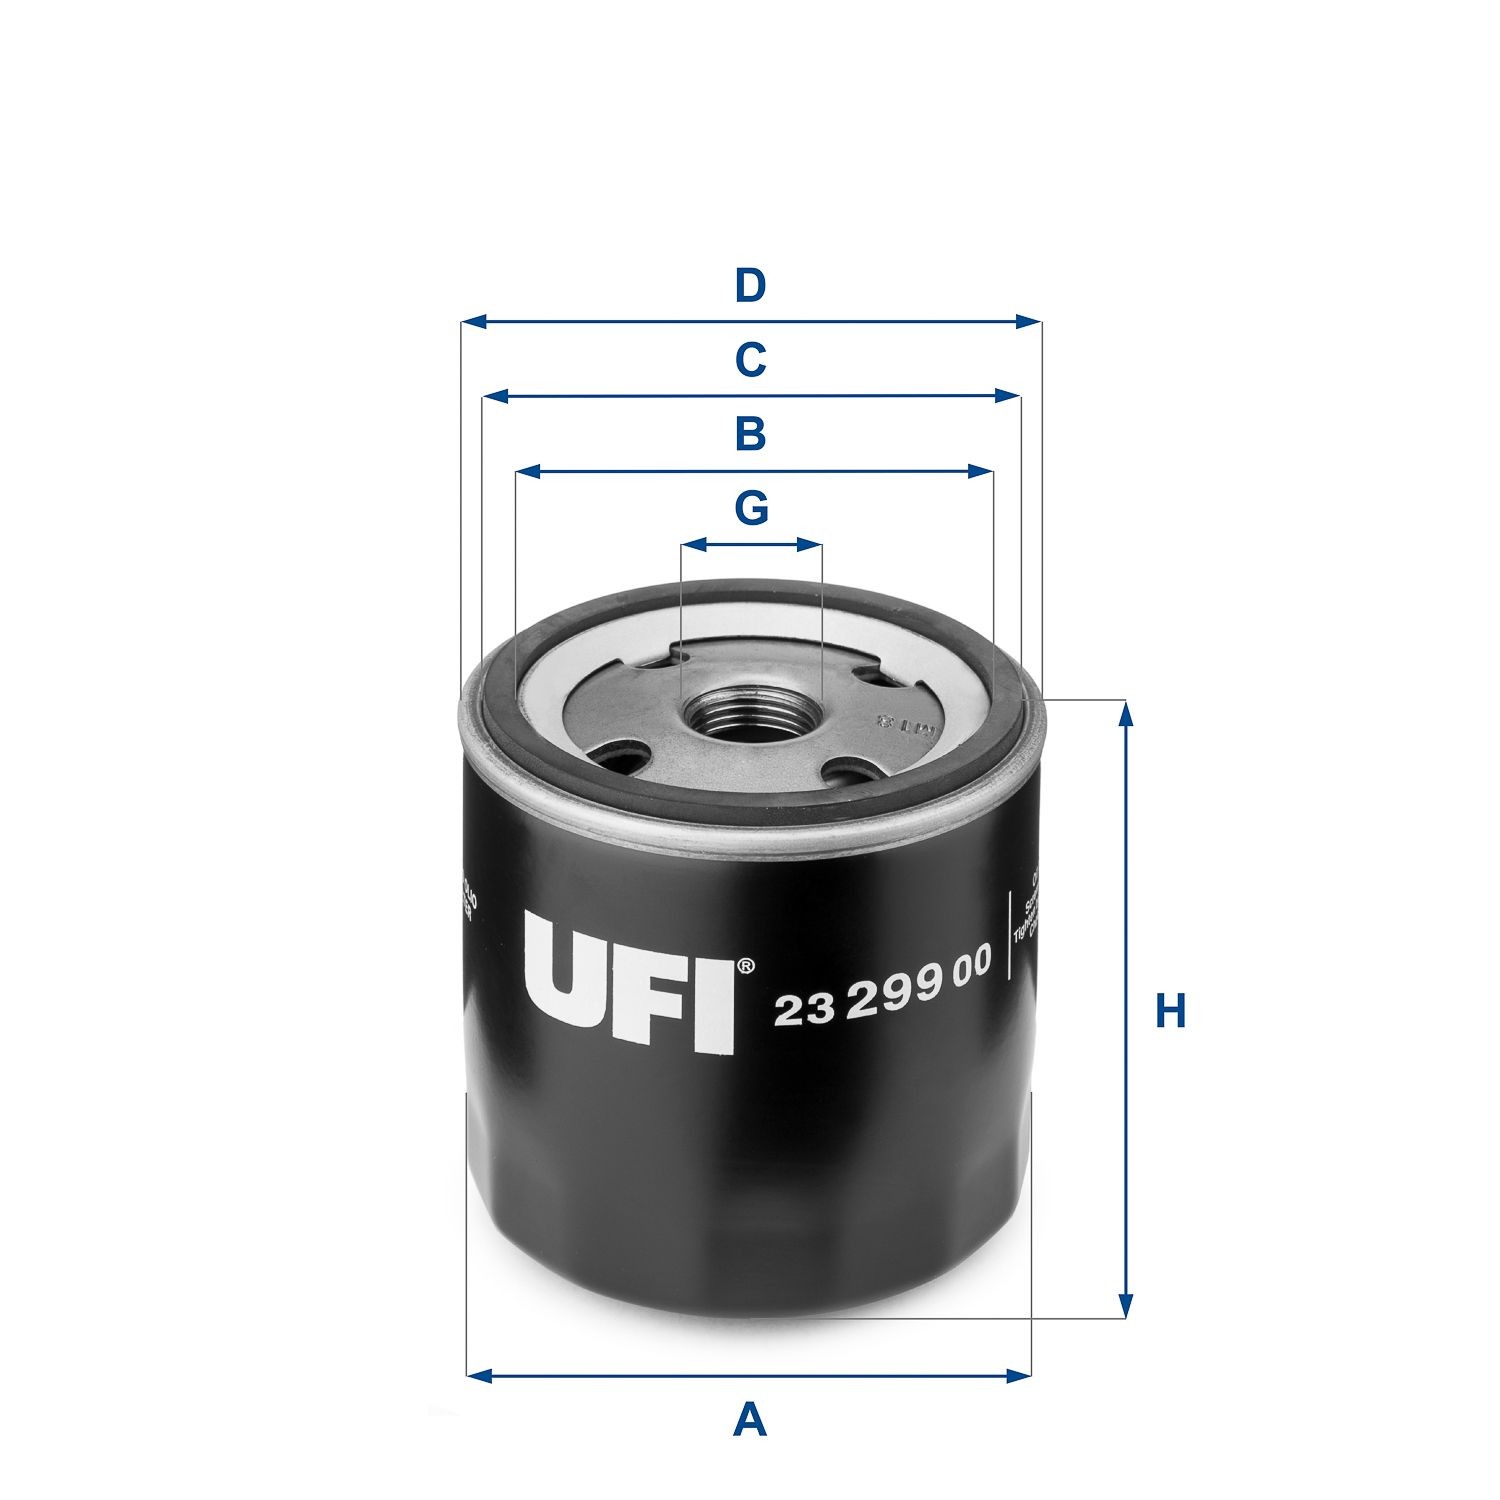 23.299.00 UFI Oil filters OPEL M 18 X 1,5, Spin-on Filter